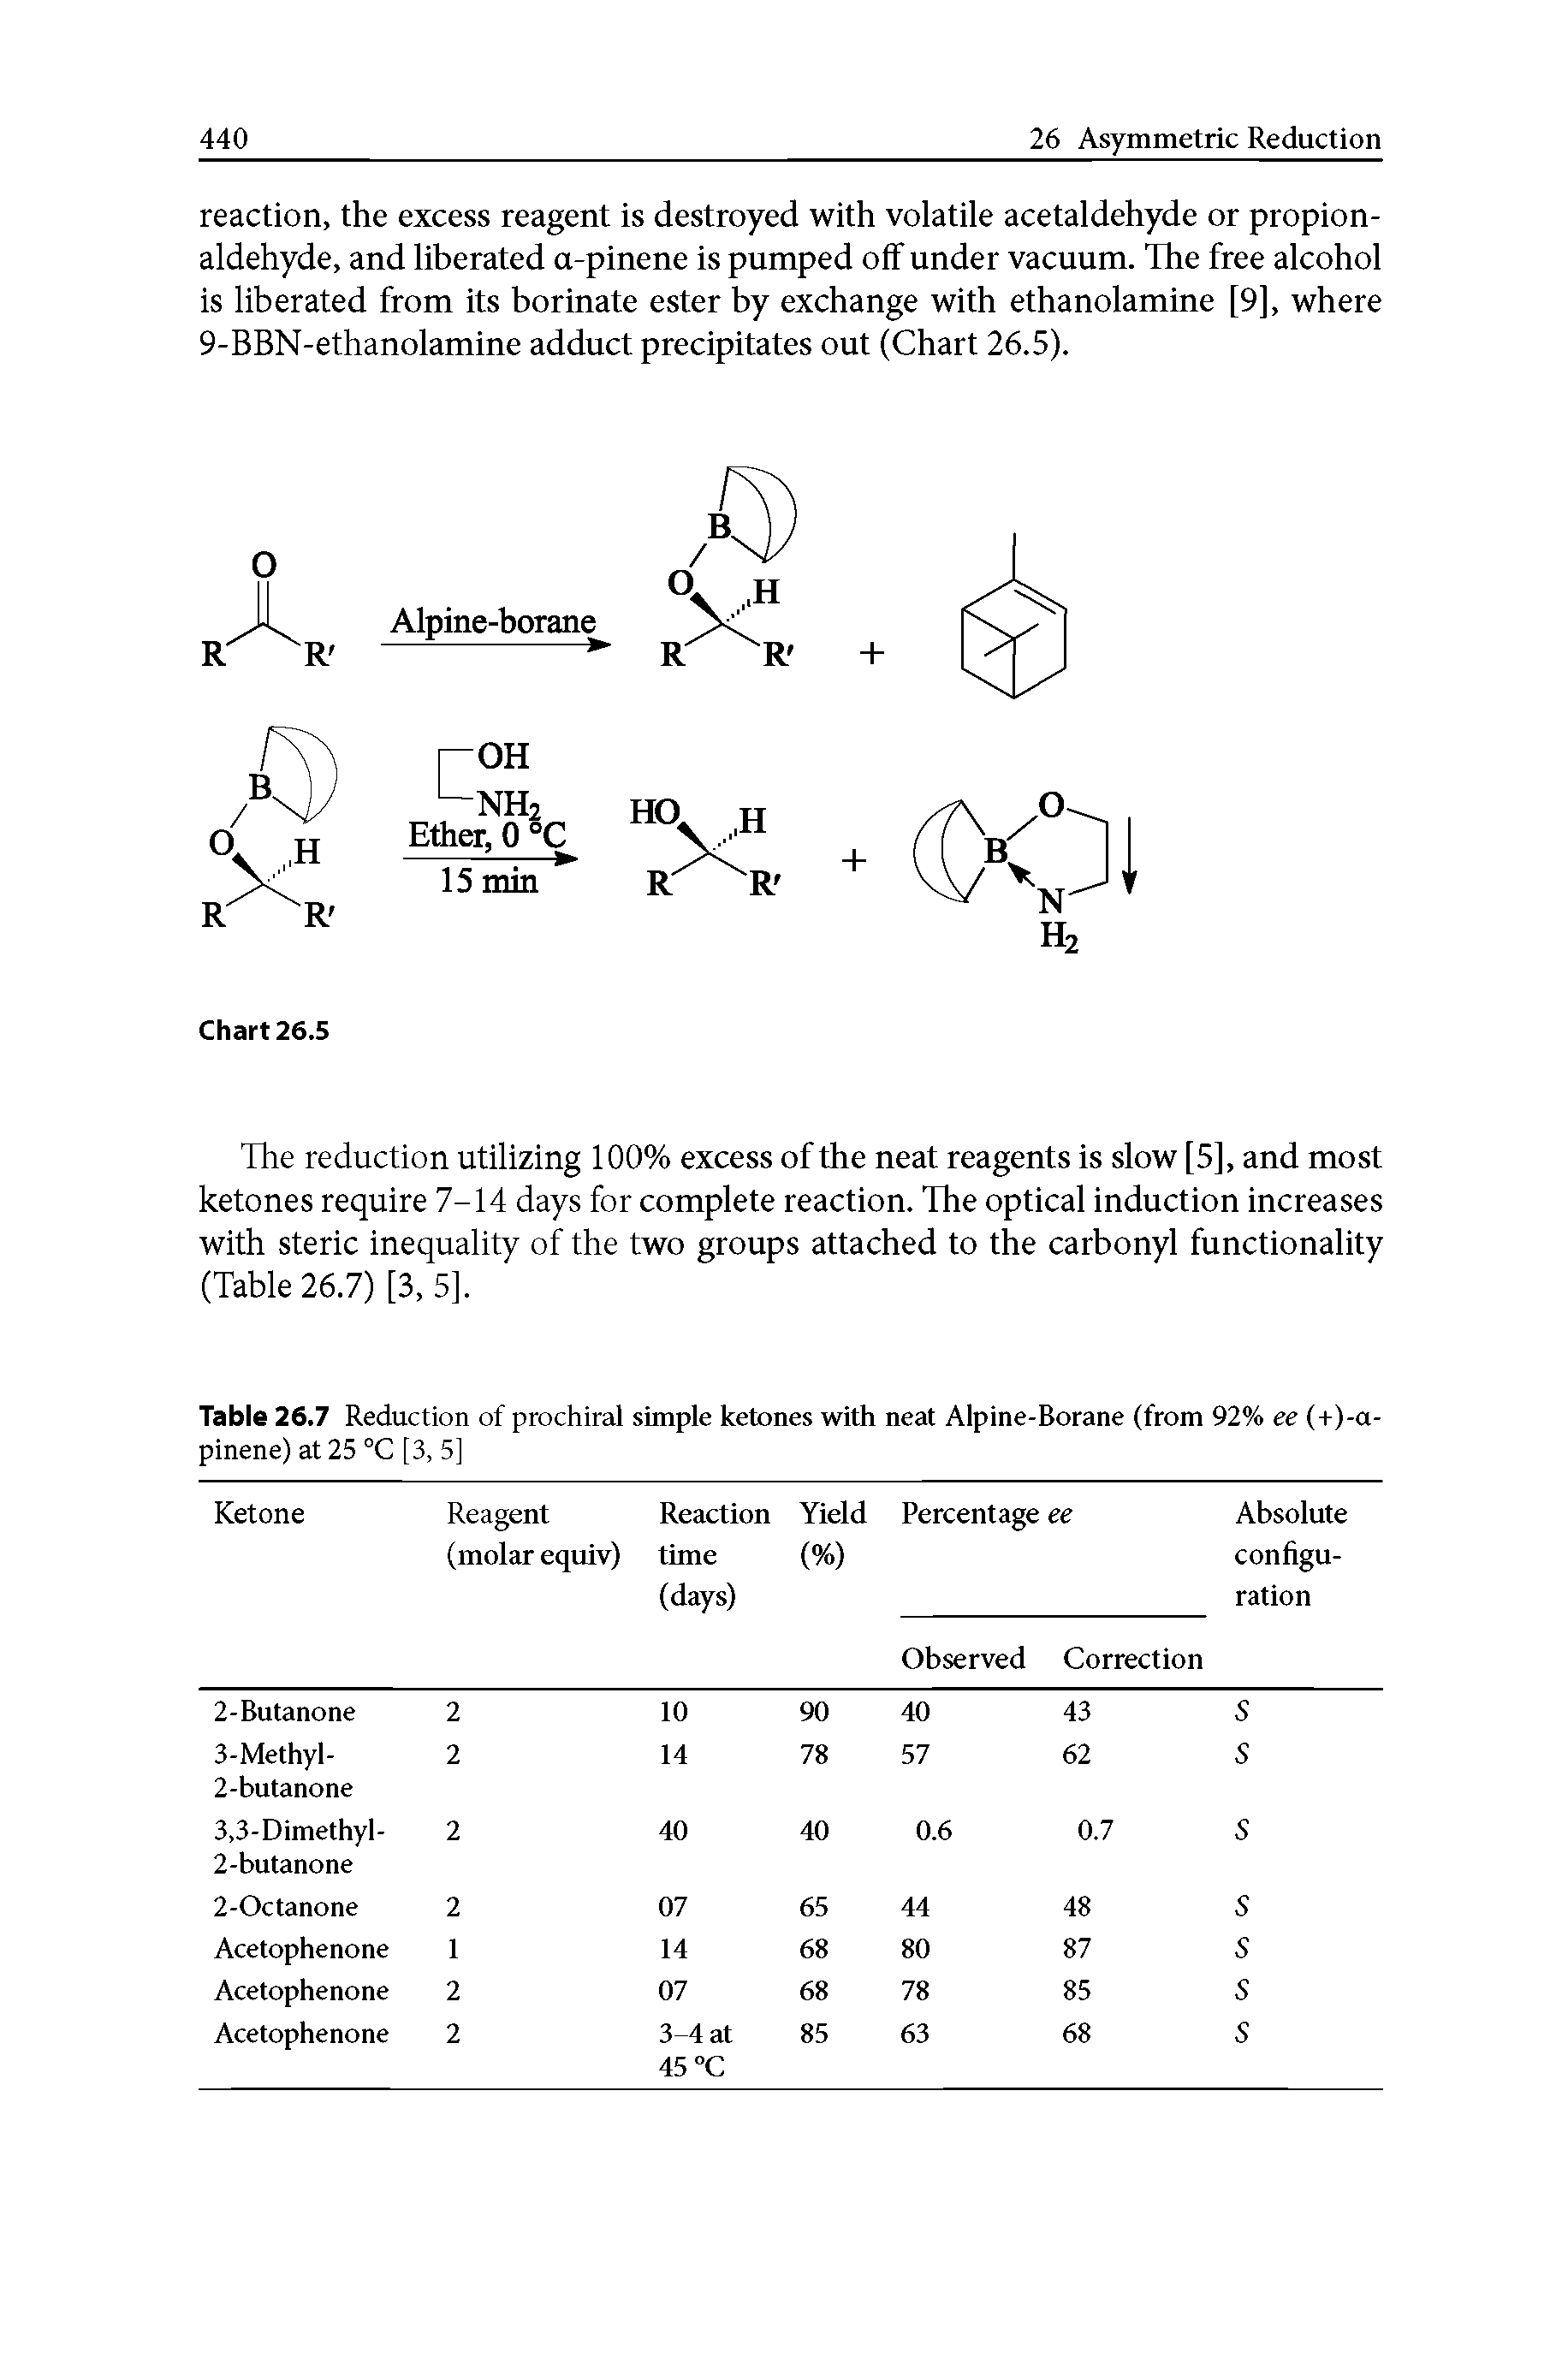 Table 26.7 Reduction of prochiral simple ketones with neat Alpine-Borane (from 92% ee (+)-a-pinene) at 25 °C [3, 5]...